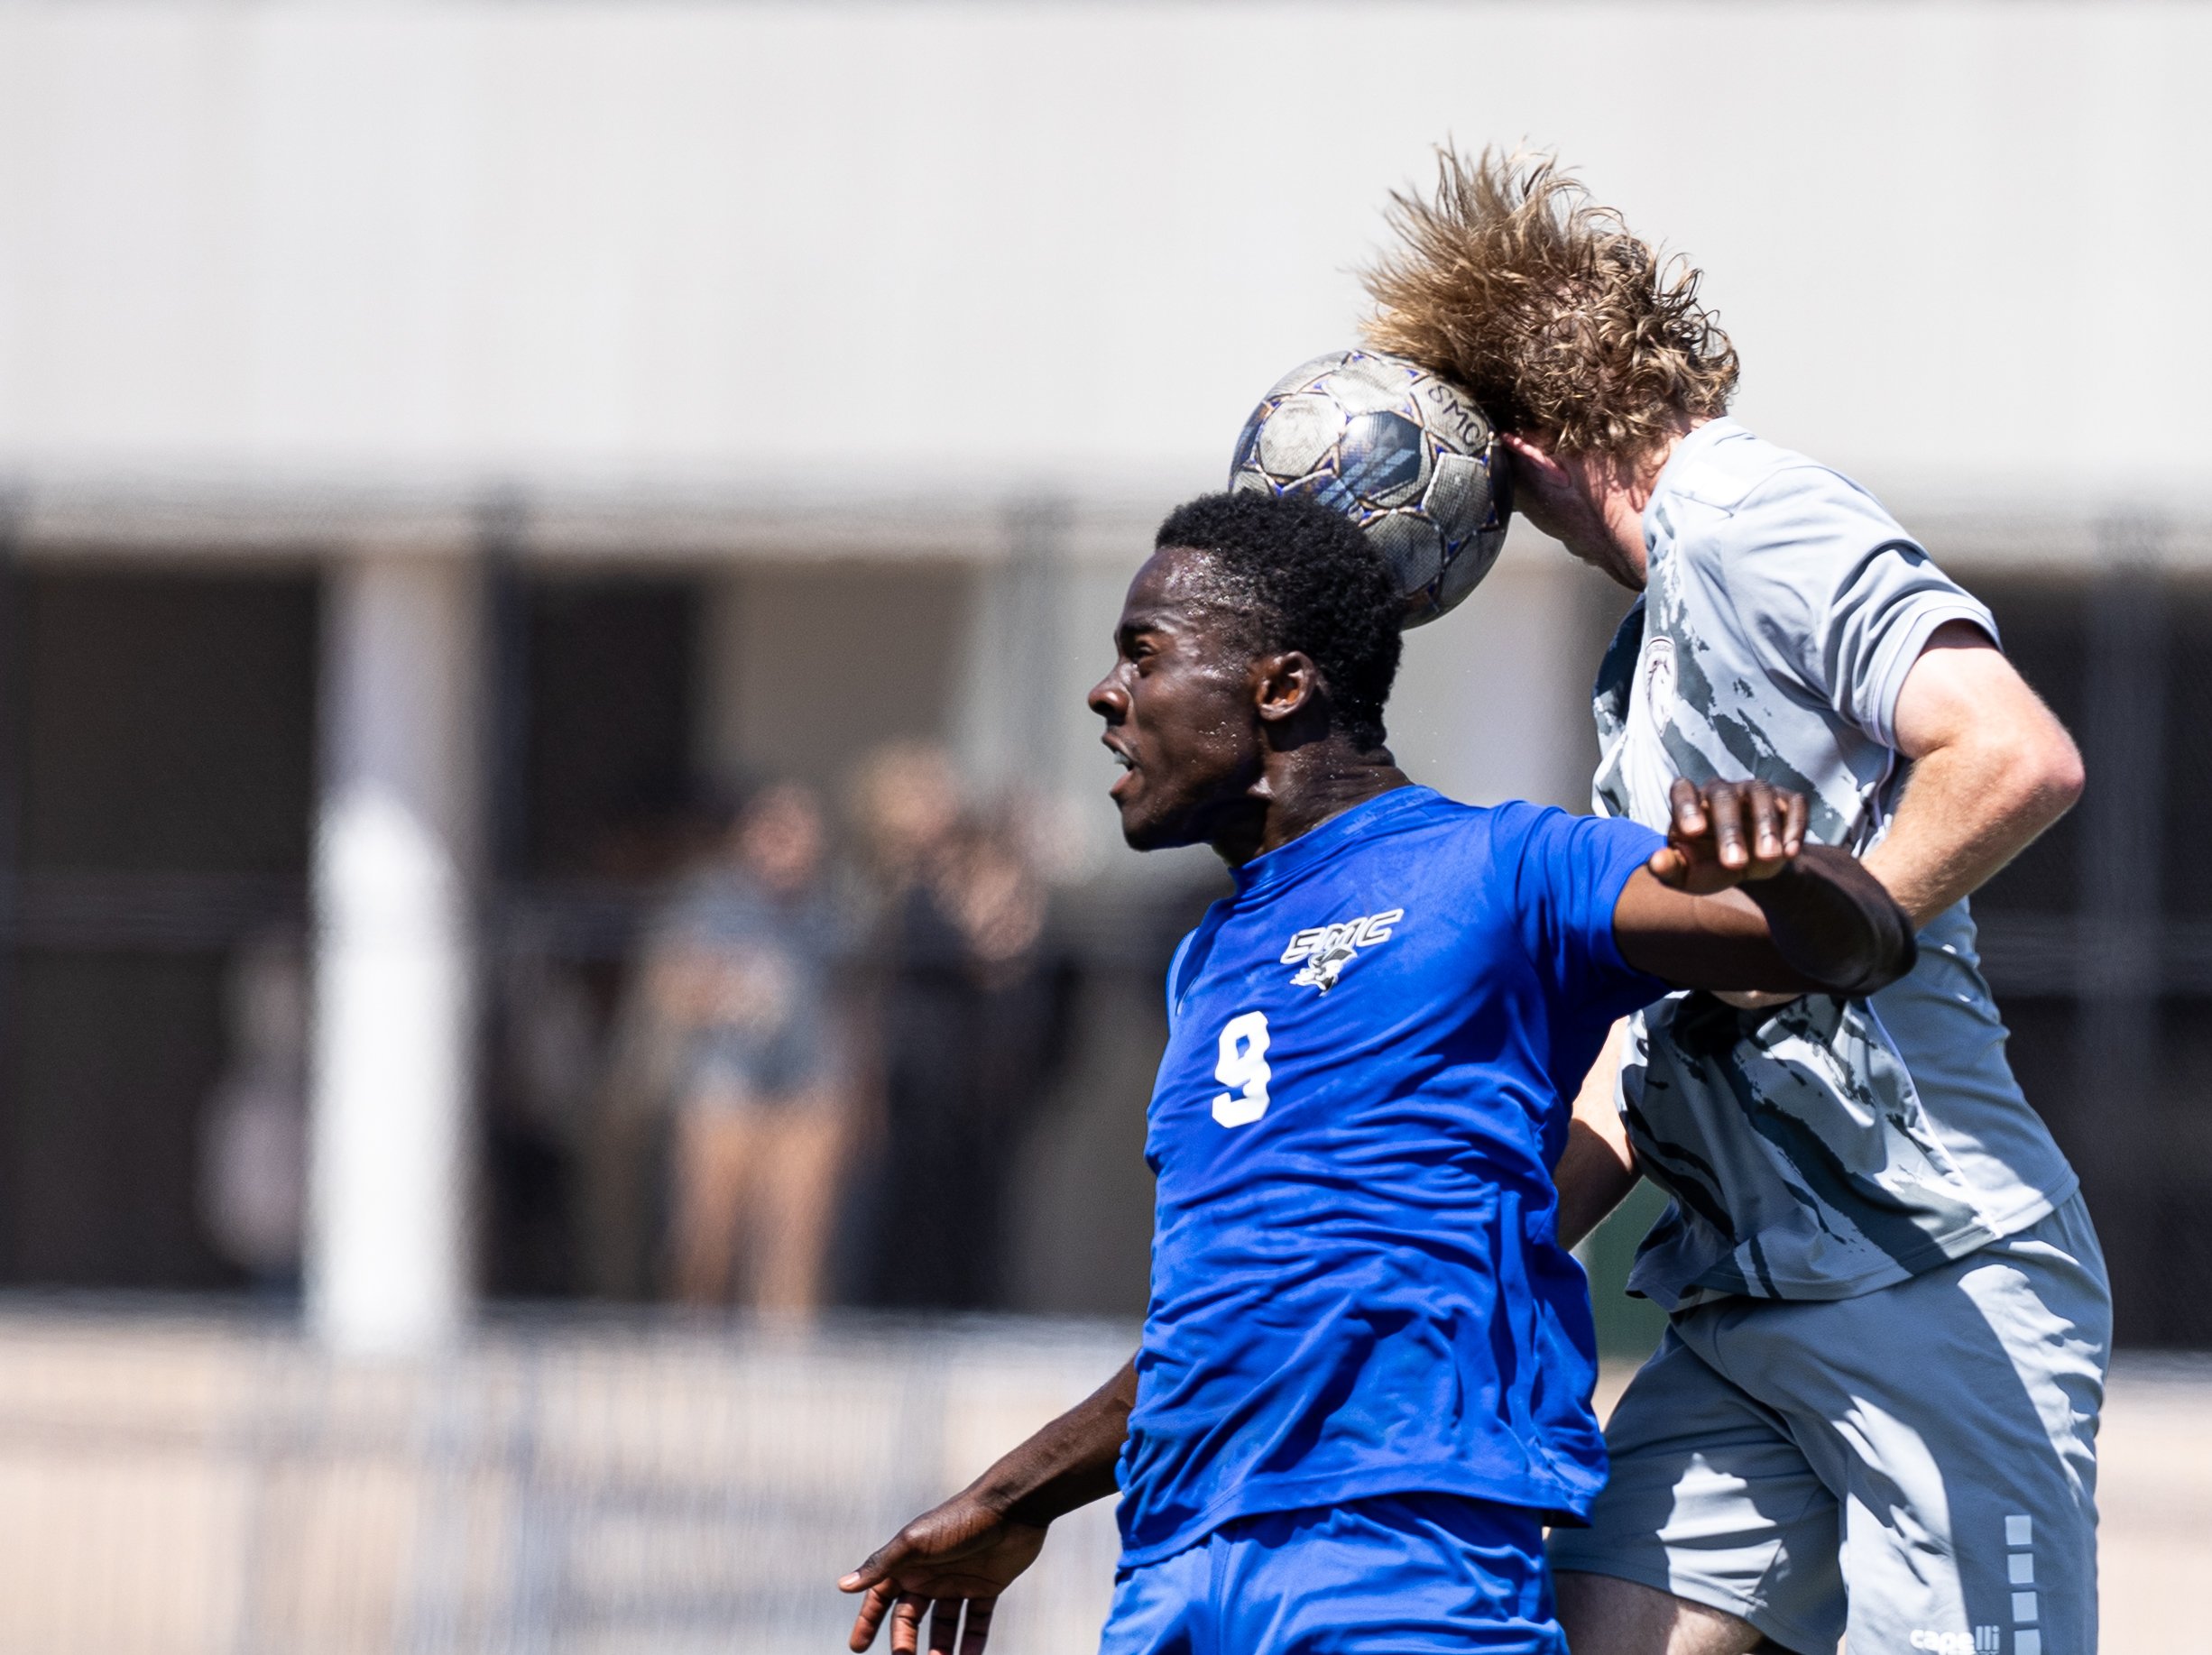  Santa Monica College men's soccer forward Philip Hephzibah(L) and Norco College defender Liam Tull(R) battling it out for the ball during their match on Tue. Sept. 12 on Corsair Field at Santa Monica, Calif. (Danilo Perez | The Corsair) 